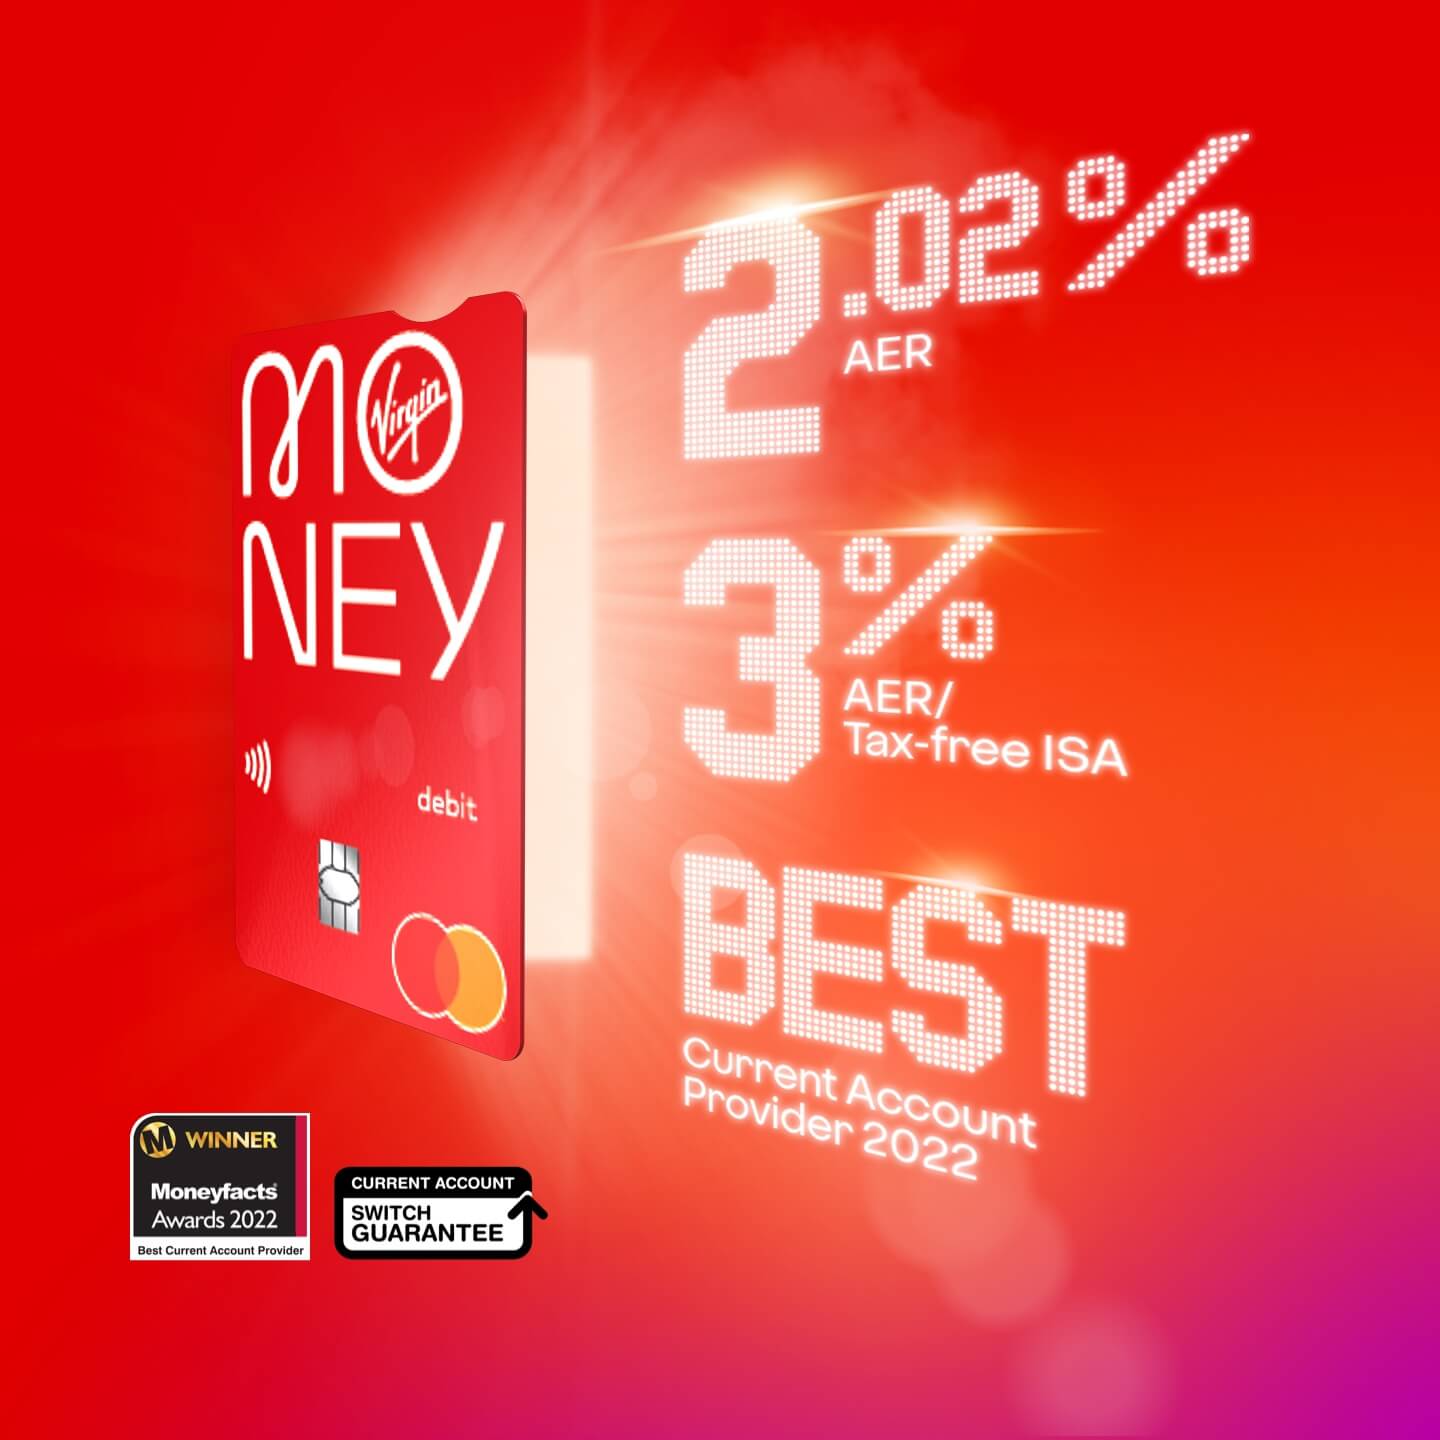 Moneyfacts award: Best current account provider 2022. Switching your bank account to Virgin Money is all backed by the current account switch guarantee.